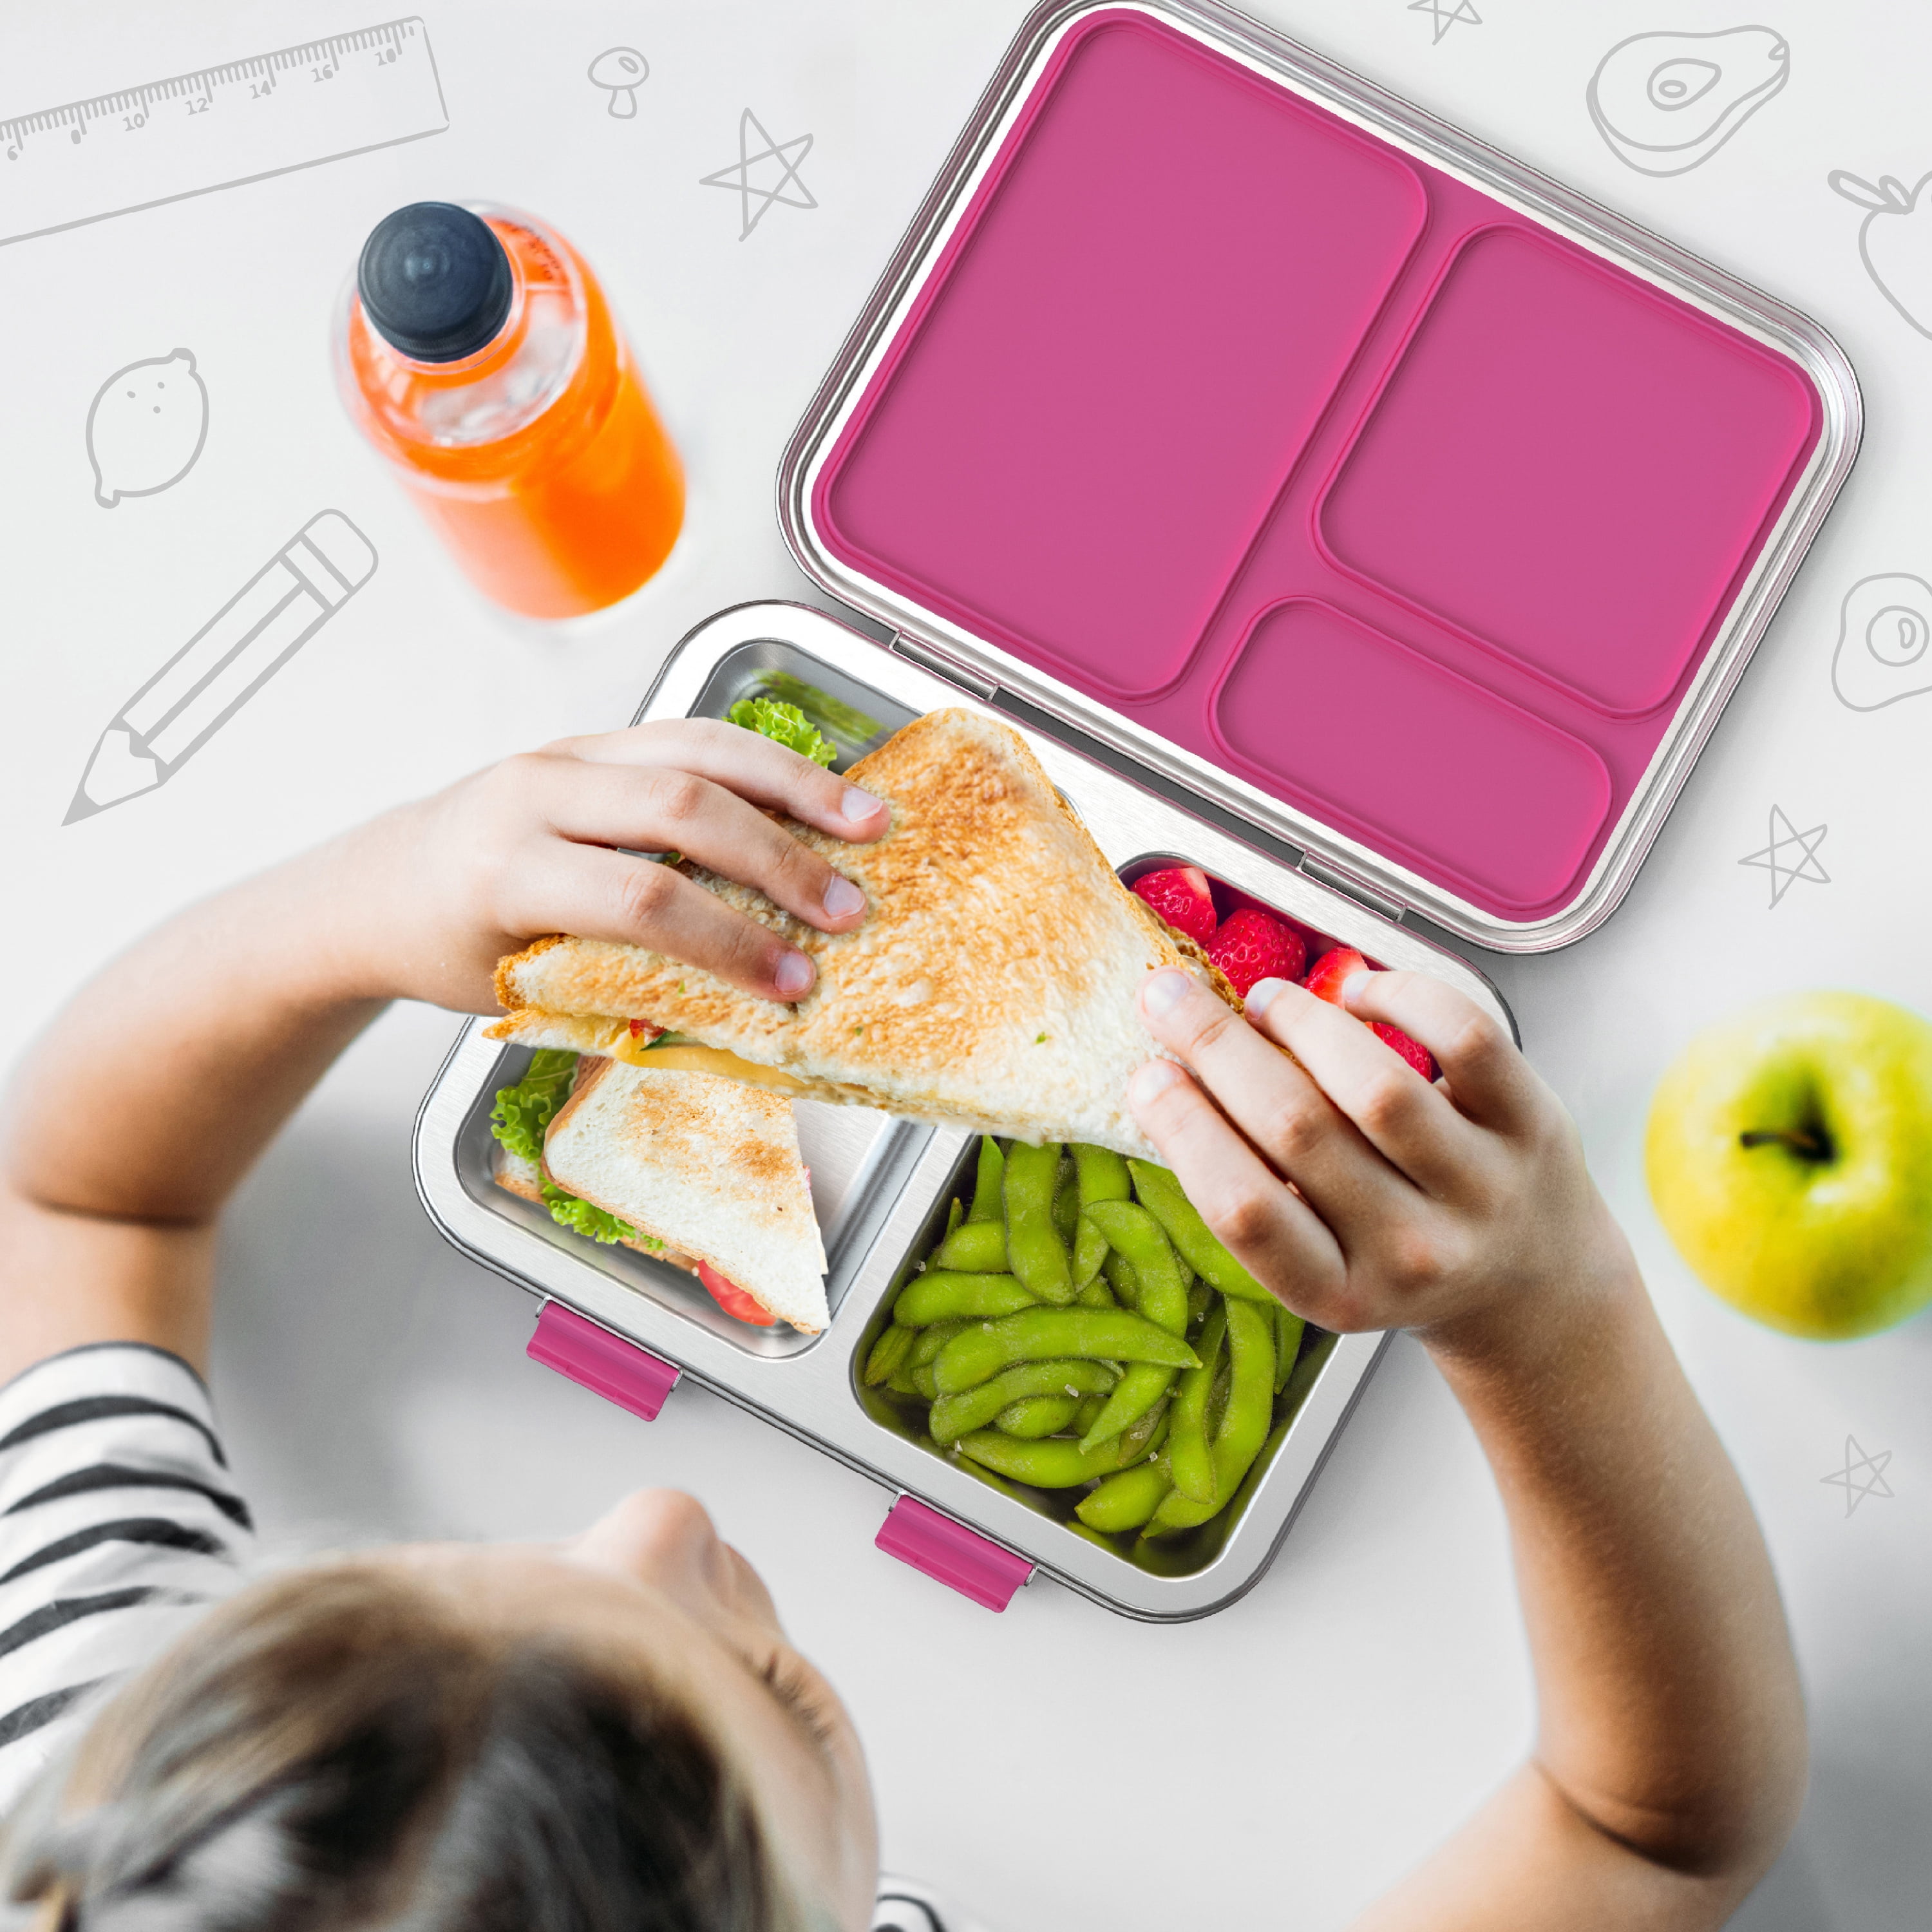 Bentgo® Kids Chill Lunch Box - Leak-Proof Bento Box with Removable Ice Pack  & 4 Compartments for On-the-Go Meals - Microwave & Dishwasher Safe